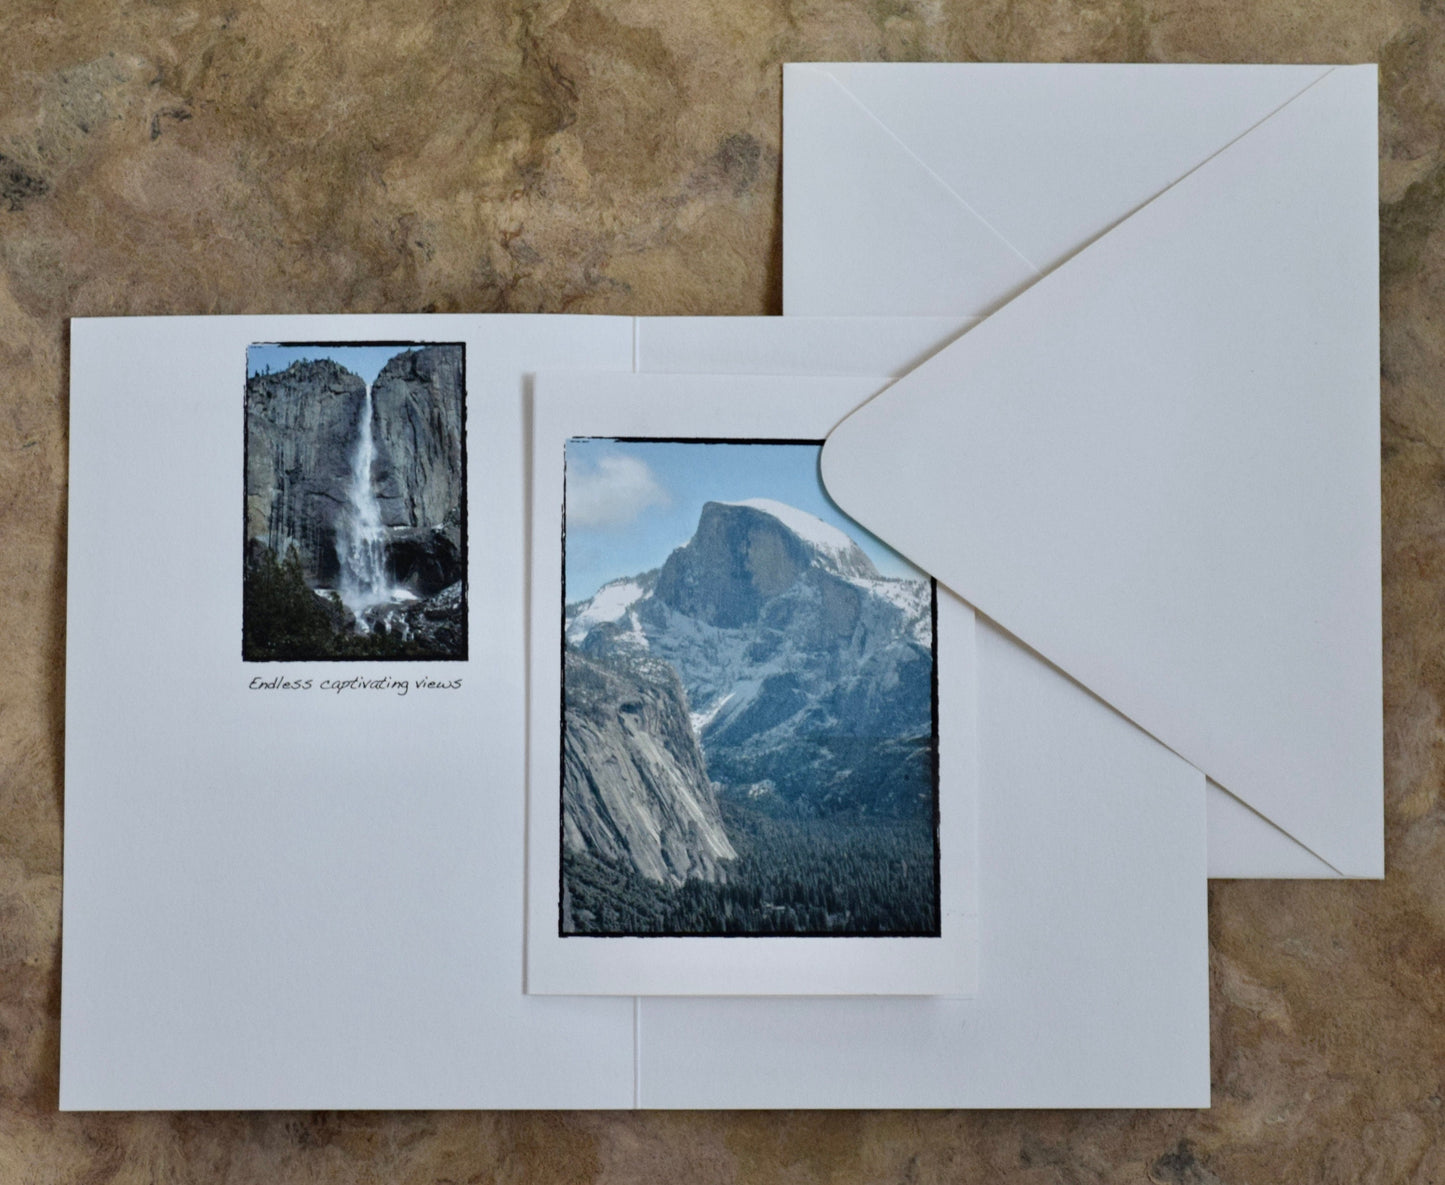 National Parks Greeting Cards - Eco-Friendly National Parks Cards